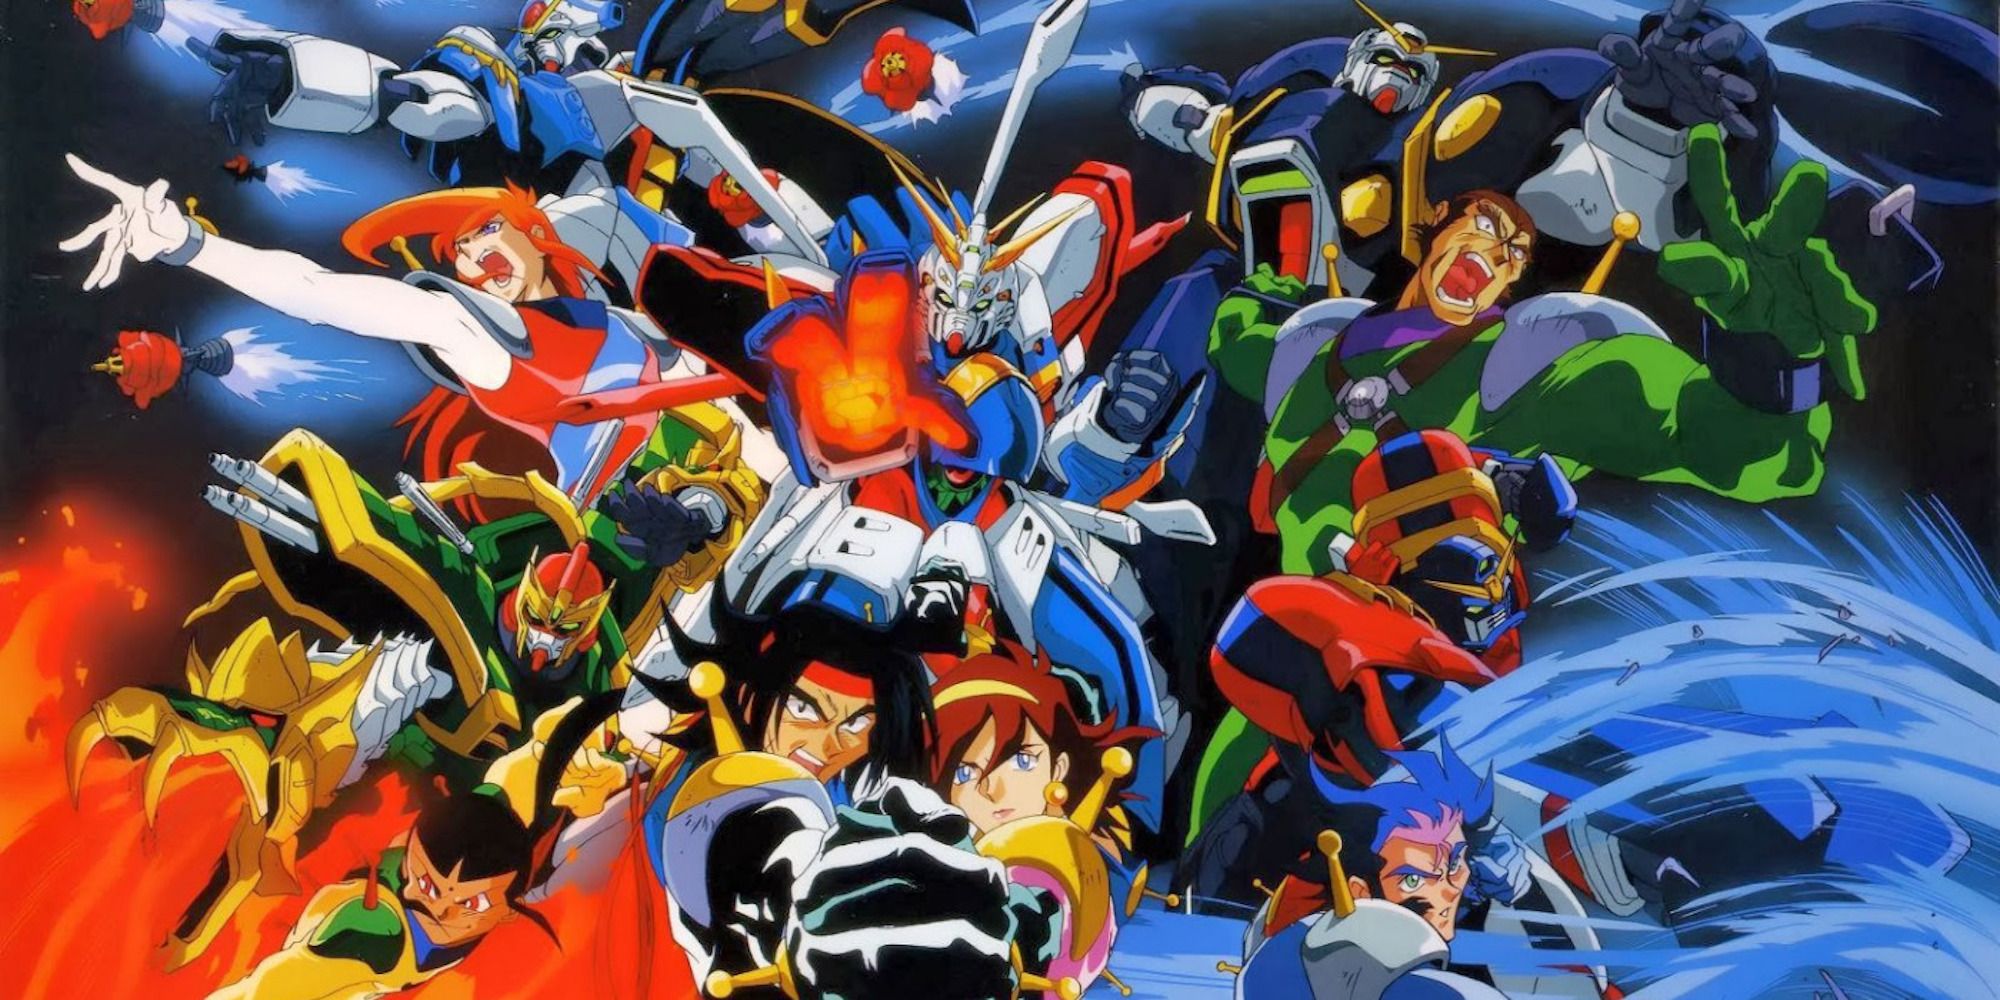 Promo art featuring characters in G Gundam